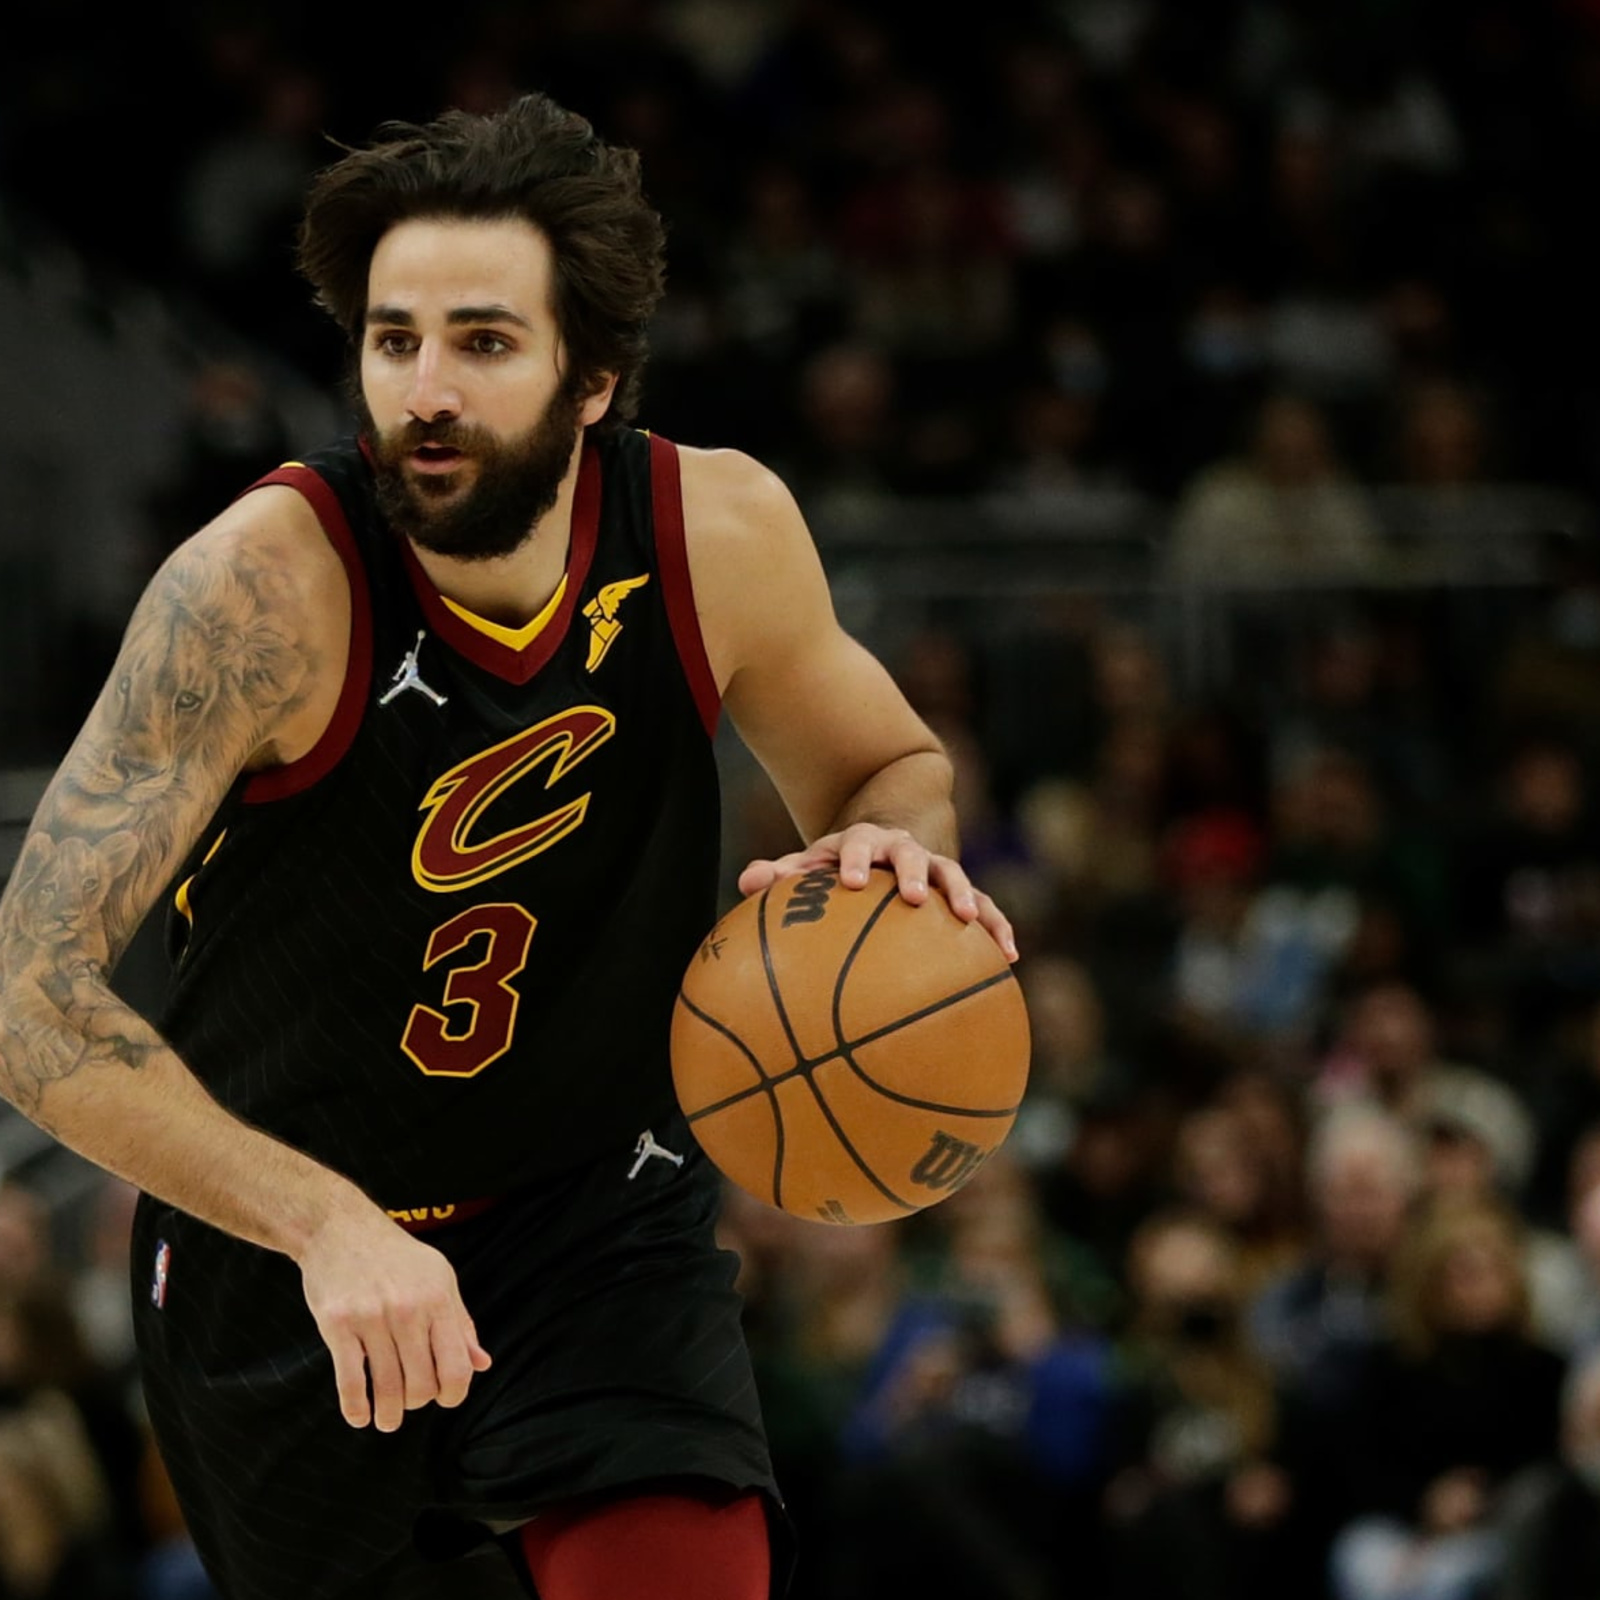 Ricky Rubio was not thrilled about being traded to Cleveland